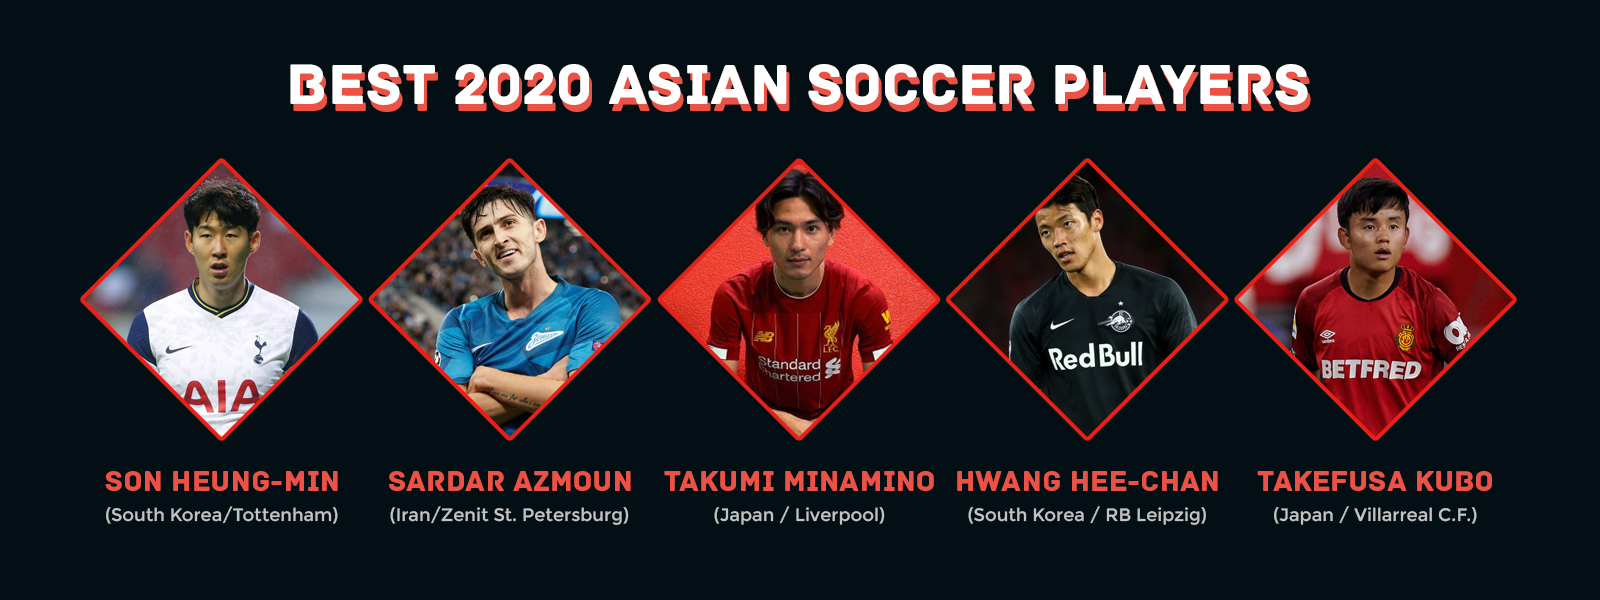 2020 Top Asian Soccer Players